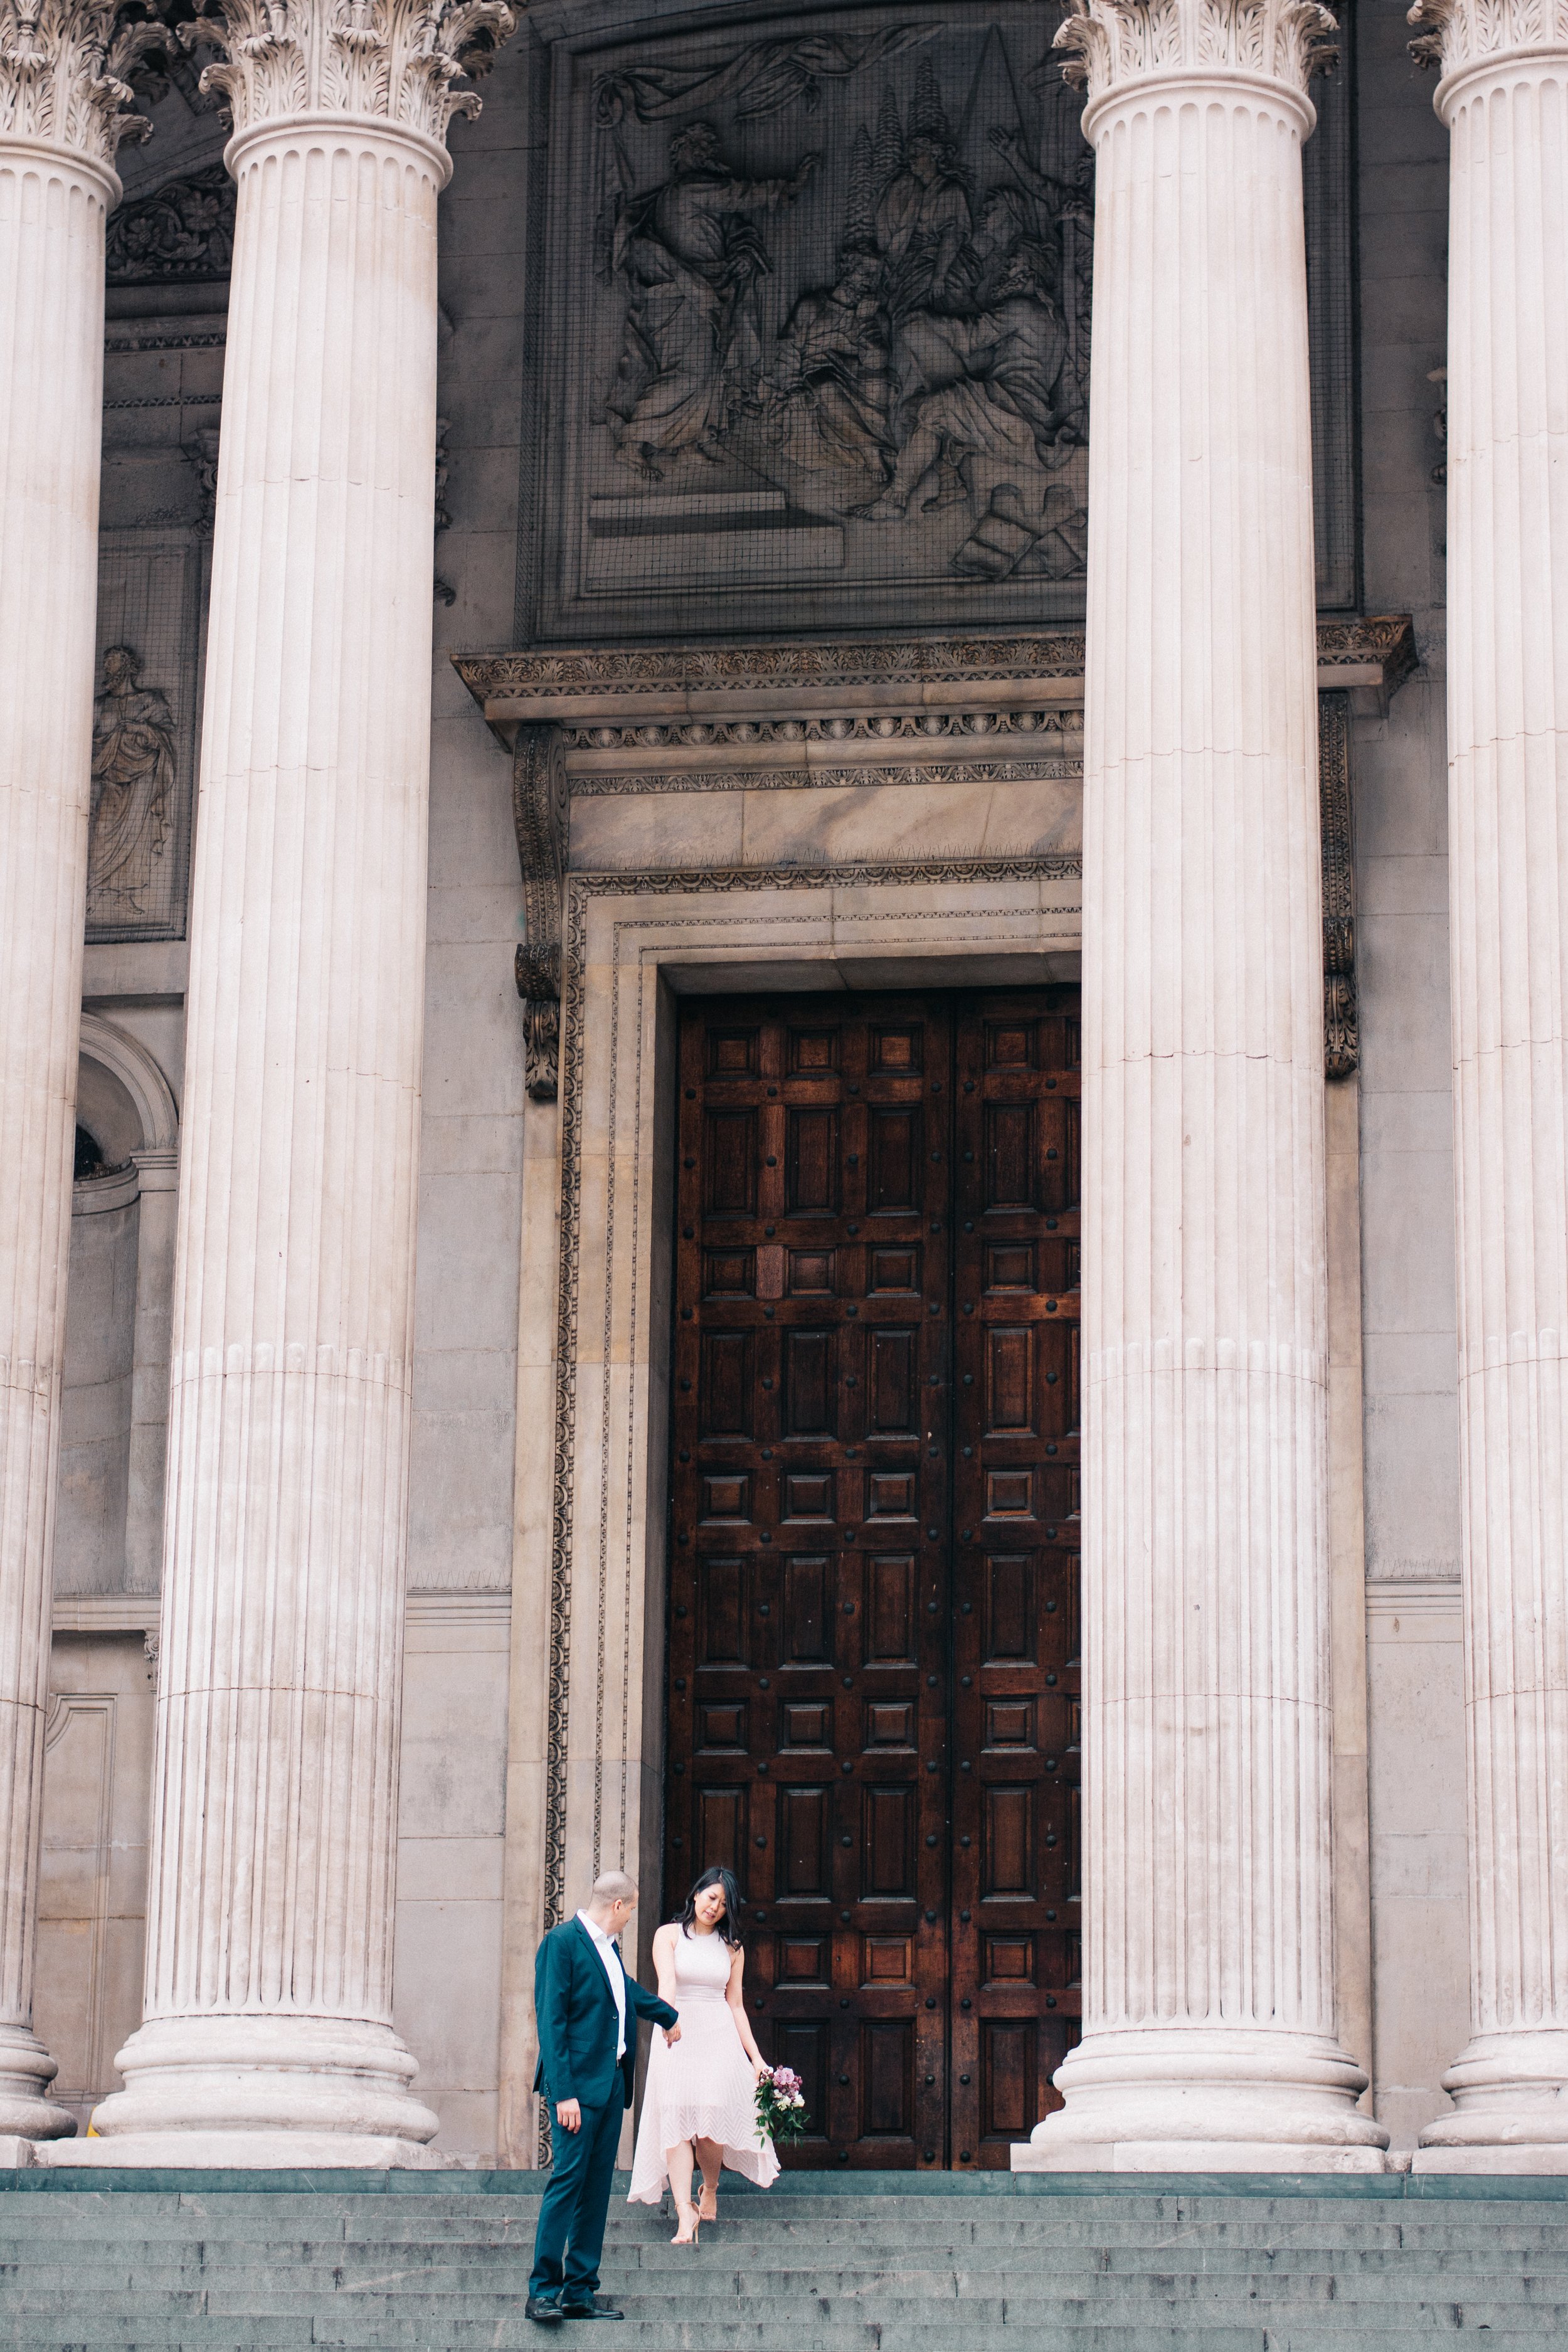 Elegant destination engagement session photography in London, UK photographed by European destination wedding photographers, Ugo Photography